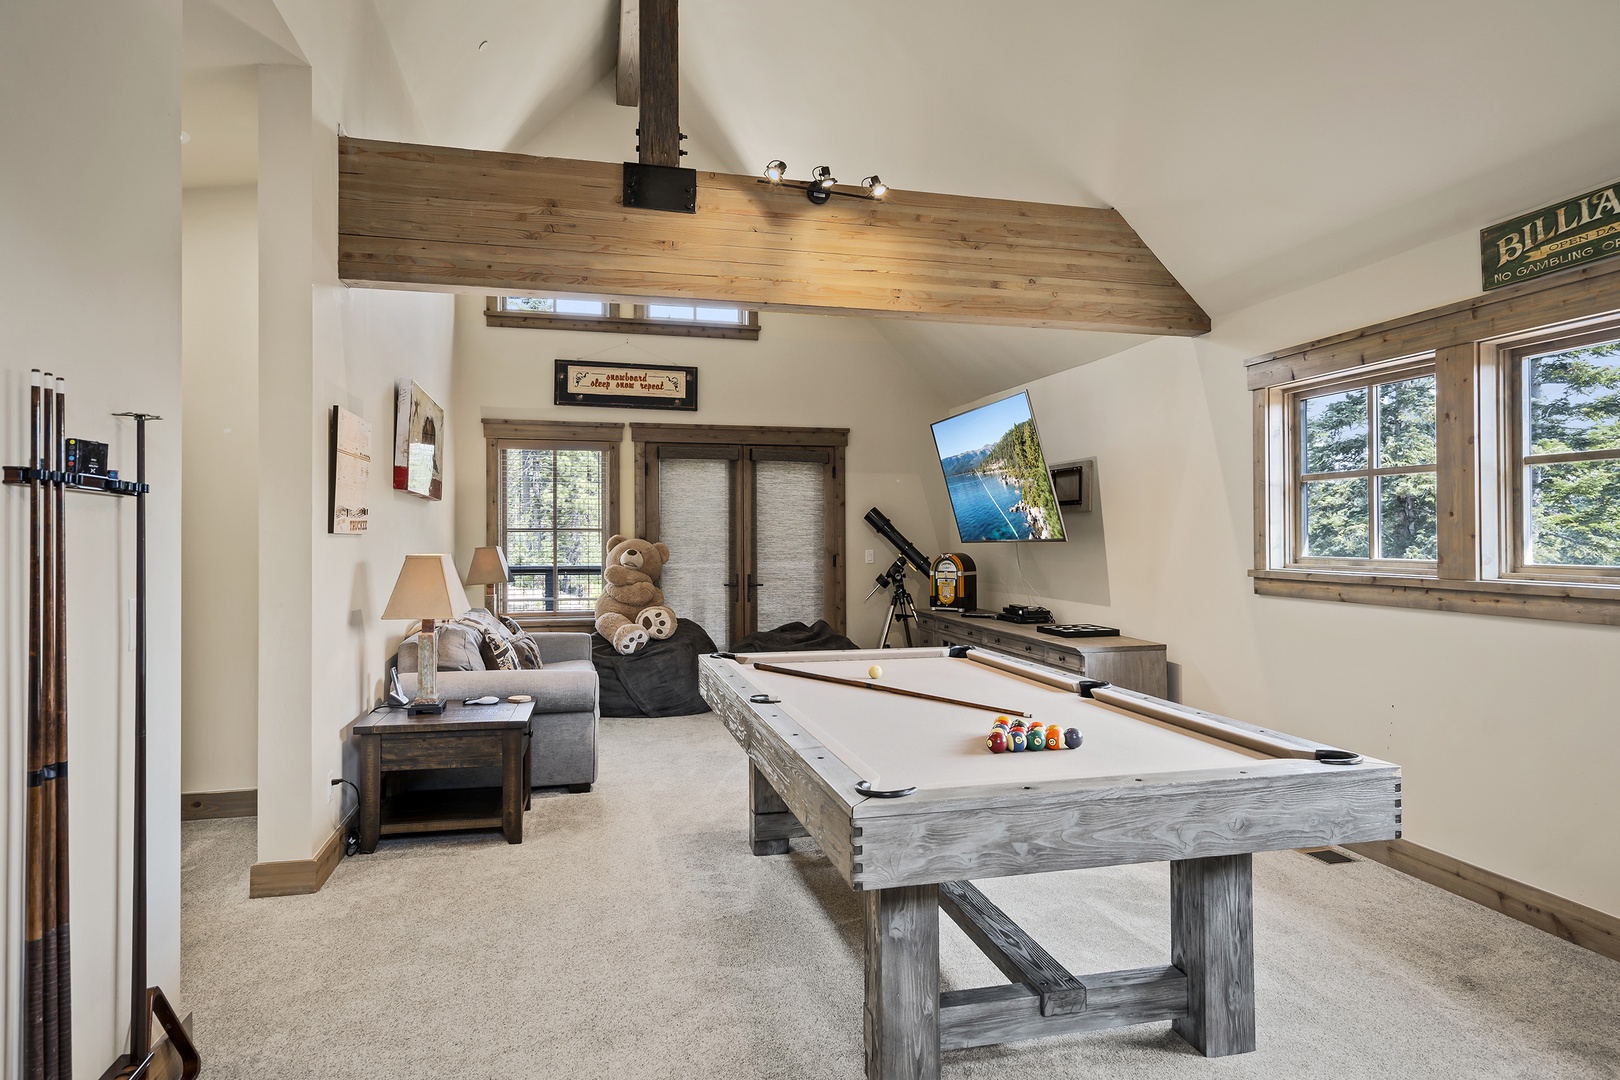 Upper Floor: clubhouse area with a pool table, wet bar, arcade game and second living room